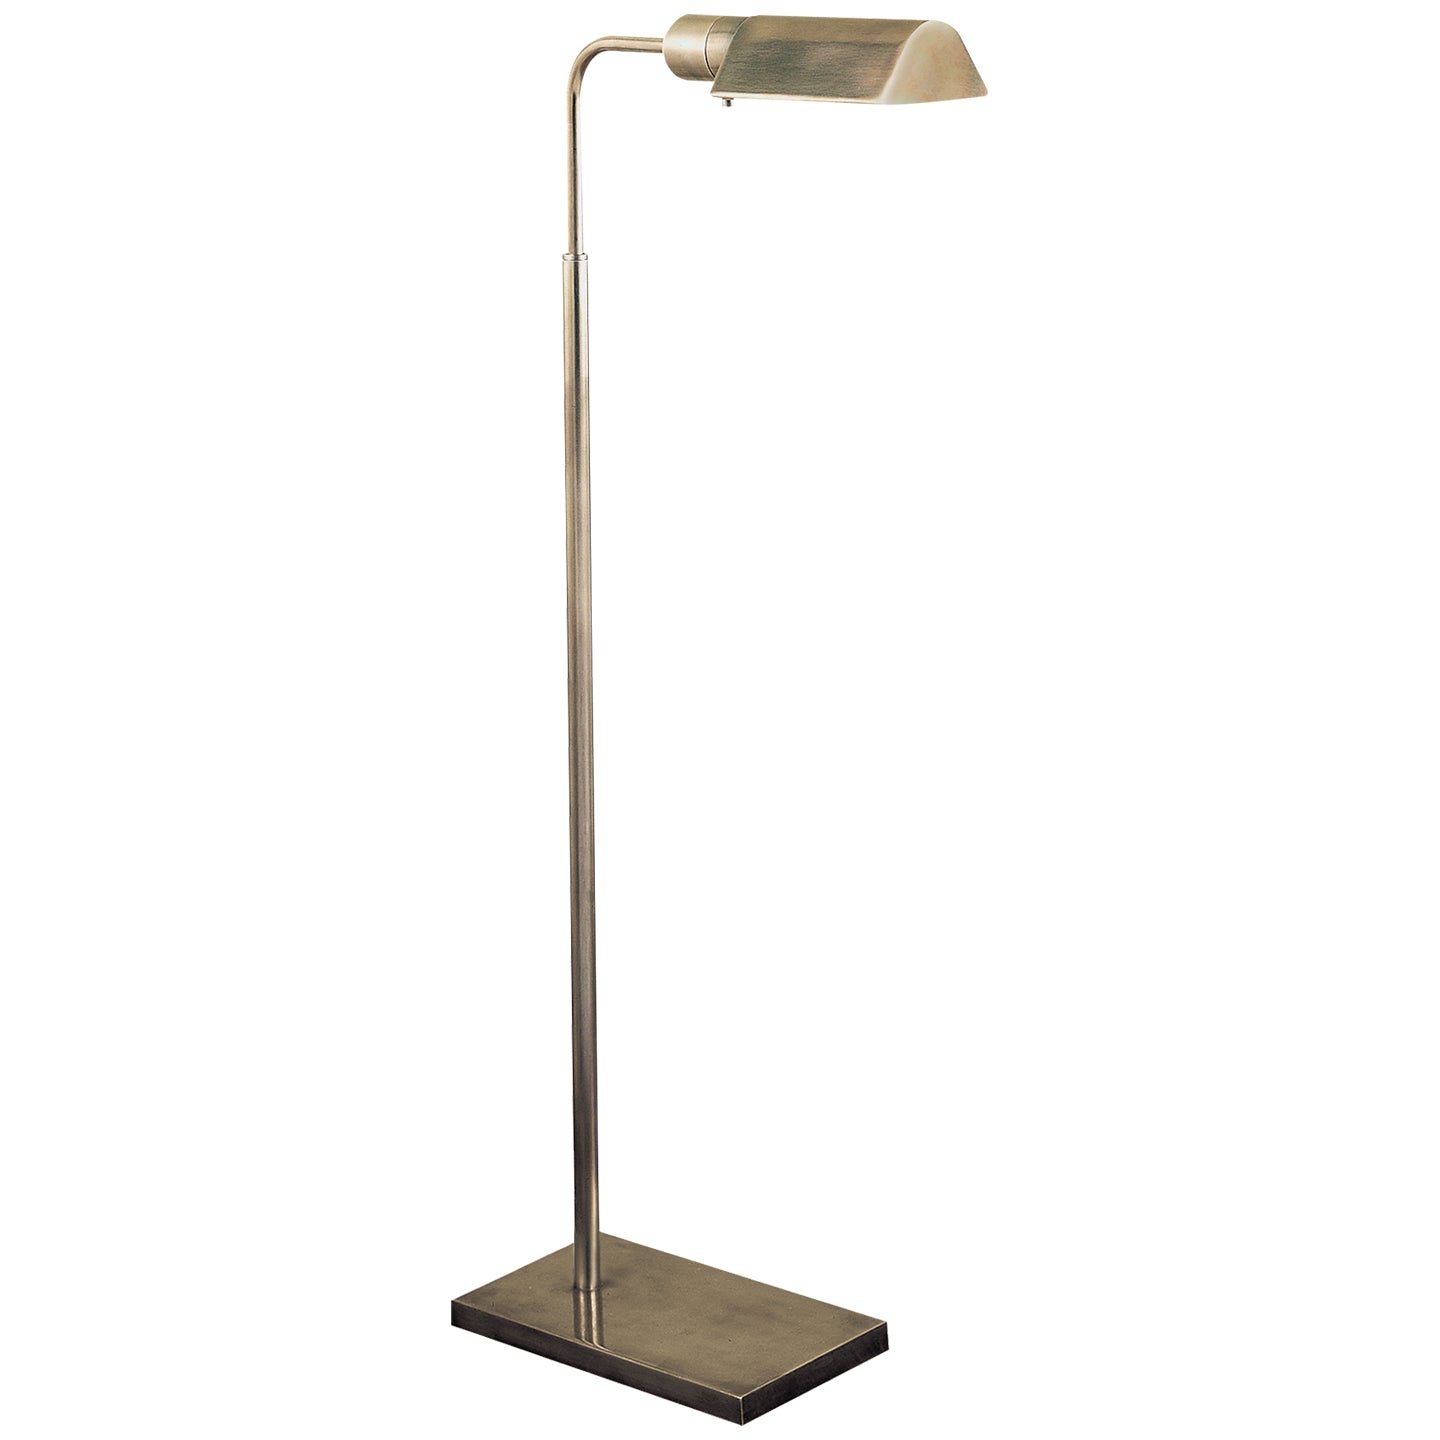 Load image into Gallery viewer, Visual Comfort Signature - 91025 AN - One Light Floor Lamp - VC CLASSIC - Antique Nickel
